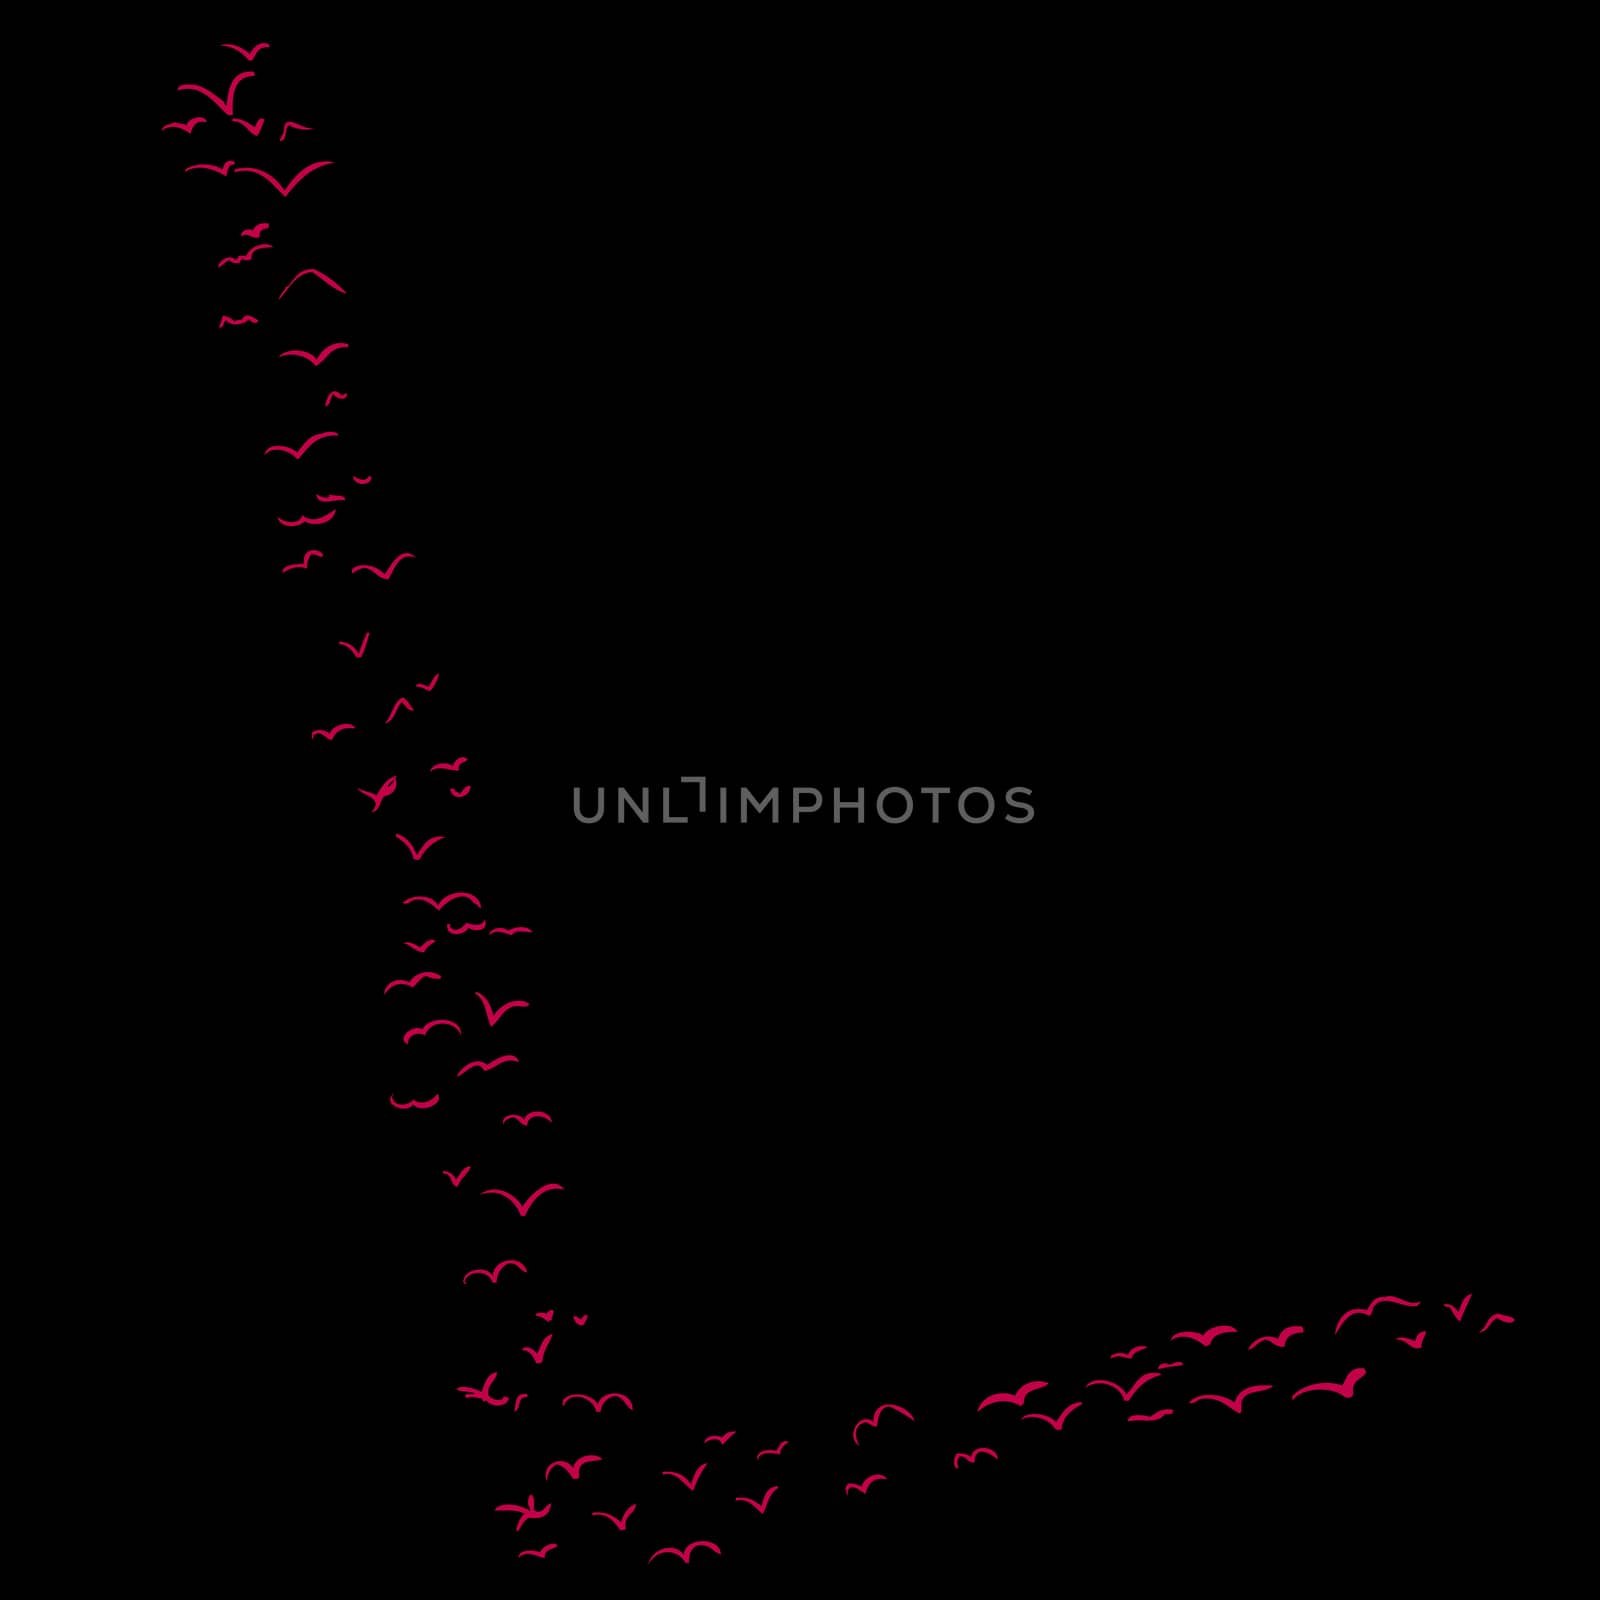 Red flock of birds in the shape of the letter l